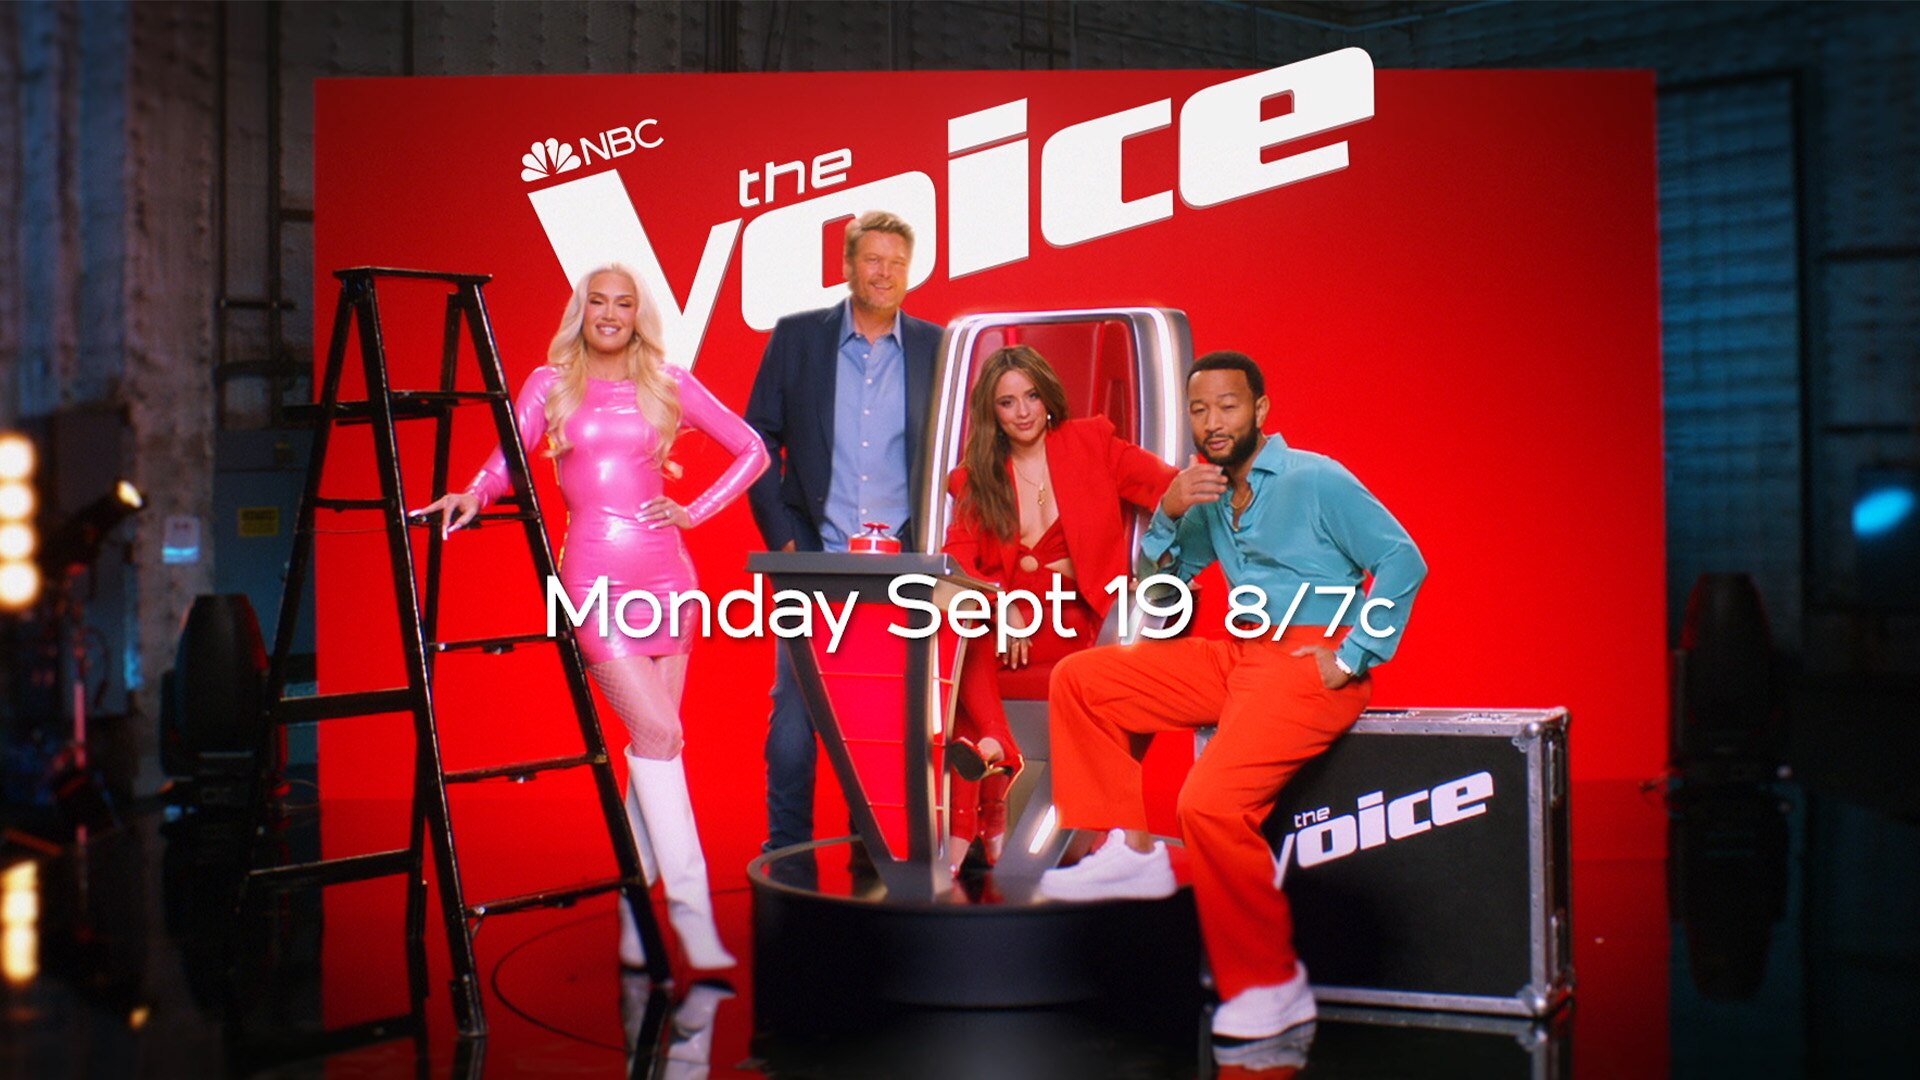 Watch The Voice Sneak Peek Camila Cabello Joins The Voice This Fall on